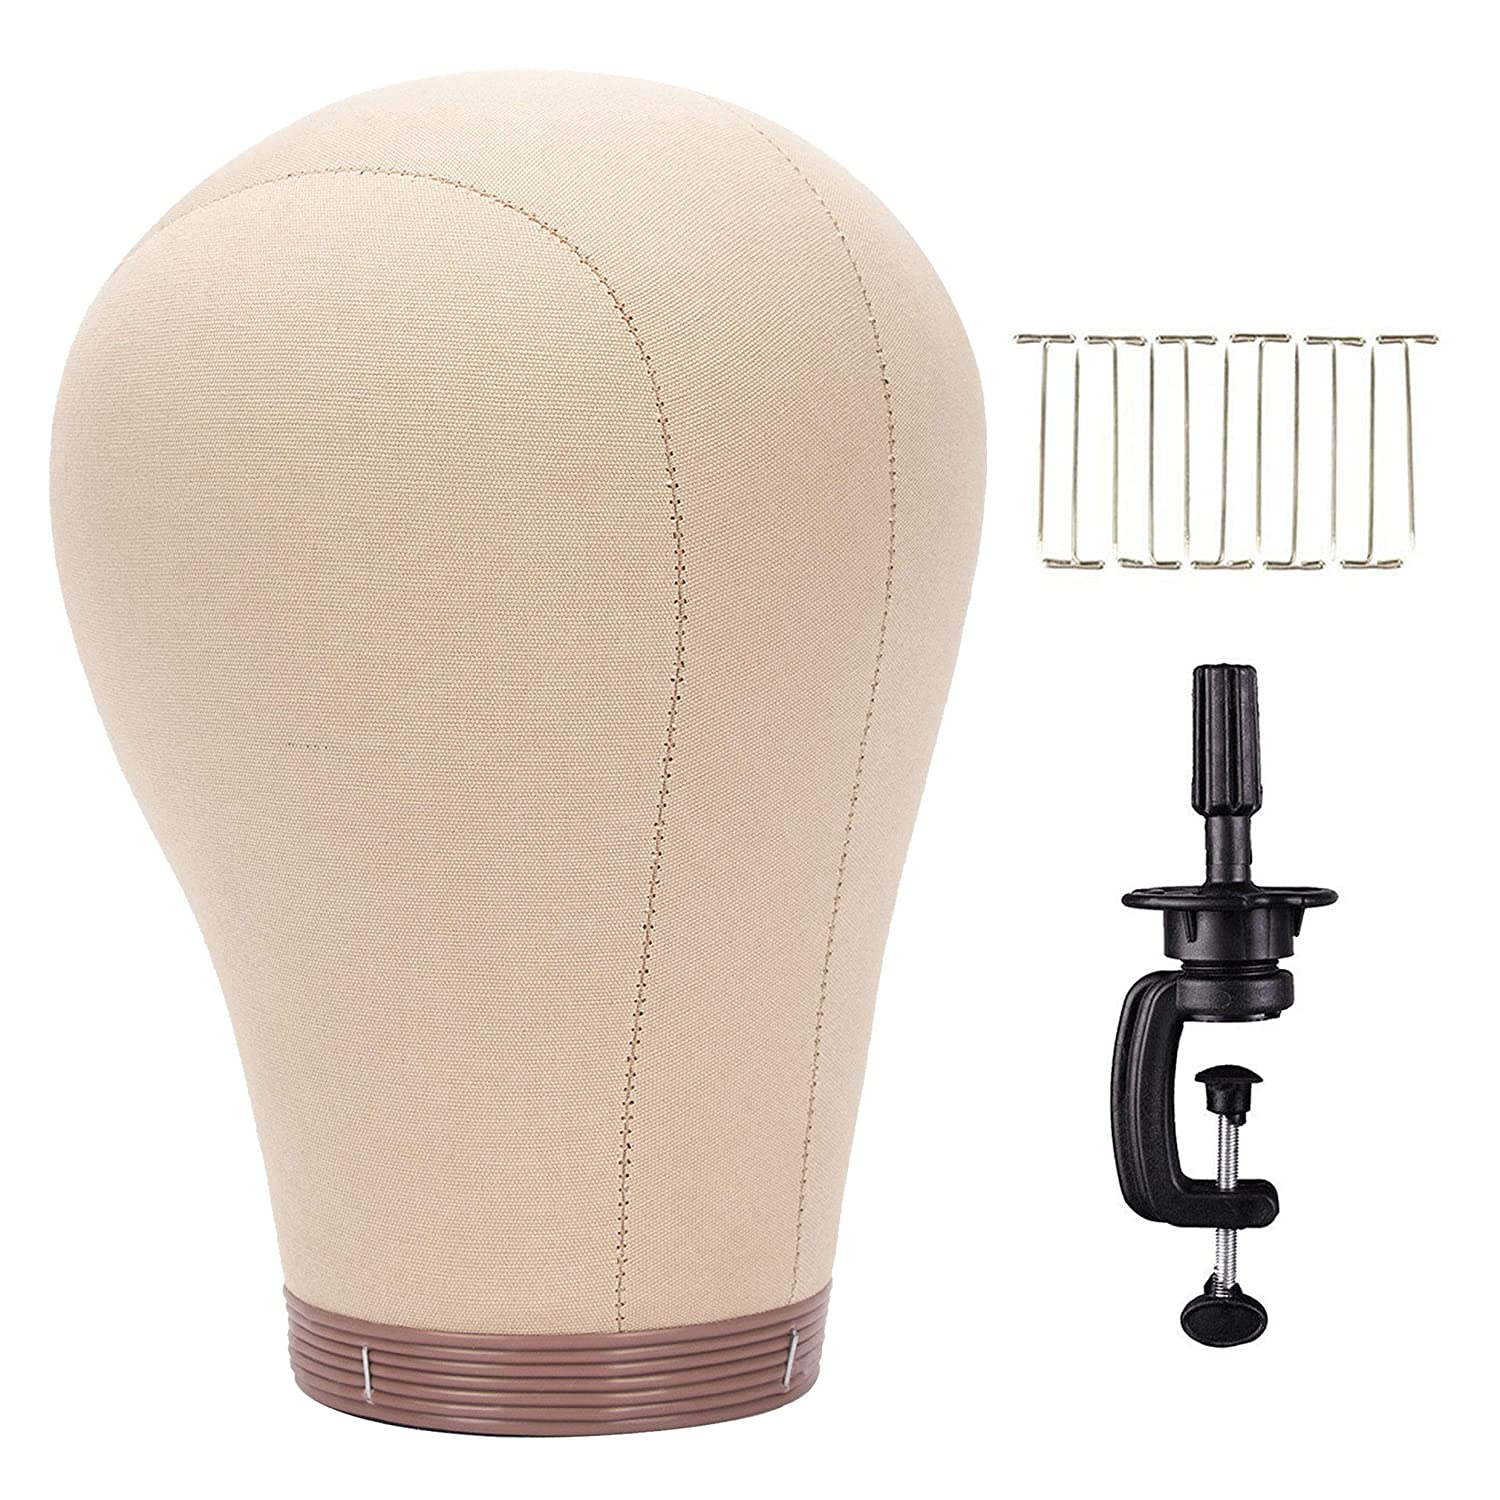 Price:$16.92     BHD BEAUTY Cork Canvas Block Mannequin Head Wig Display Styling With Mount Hole 20" (Canvas Head+Head Stand+T Pins)   Beauty